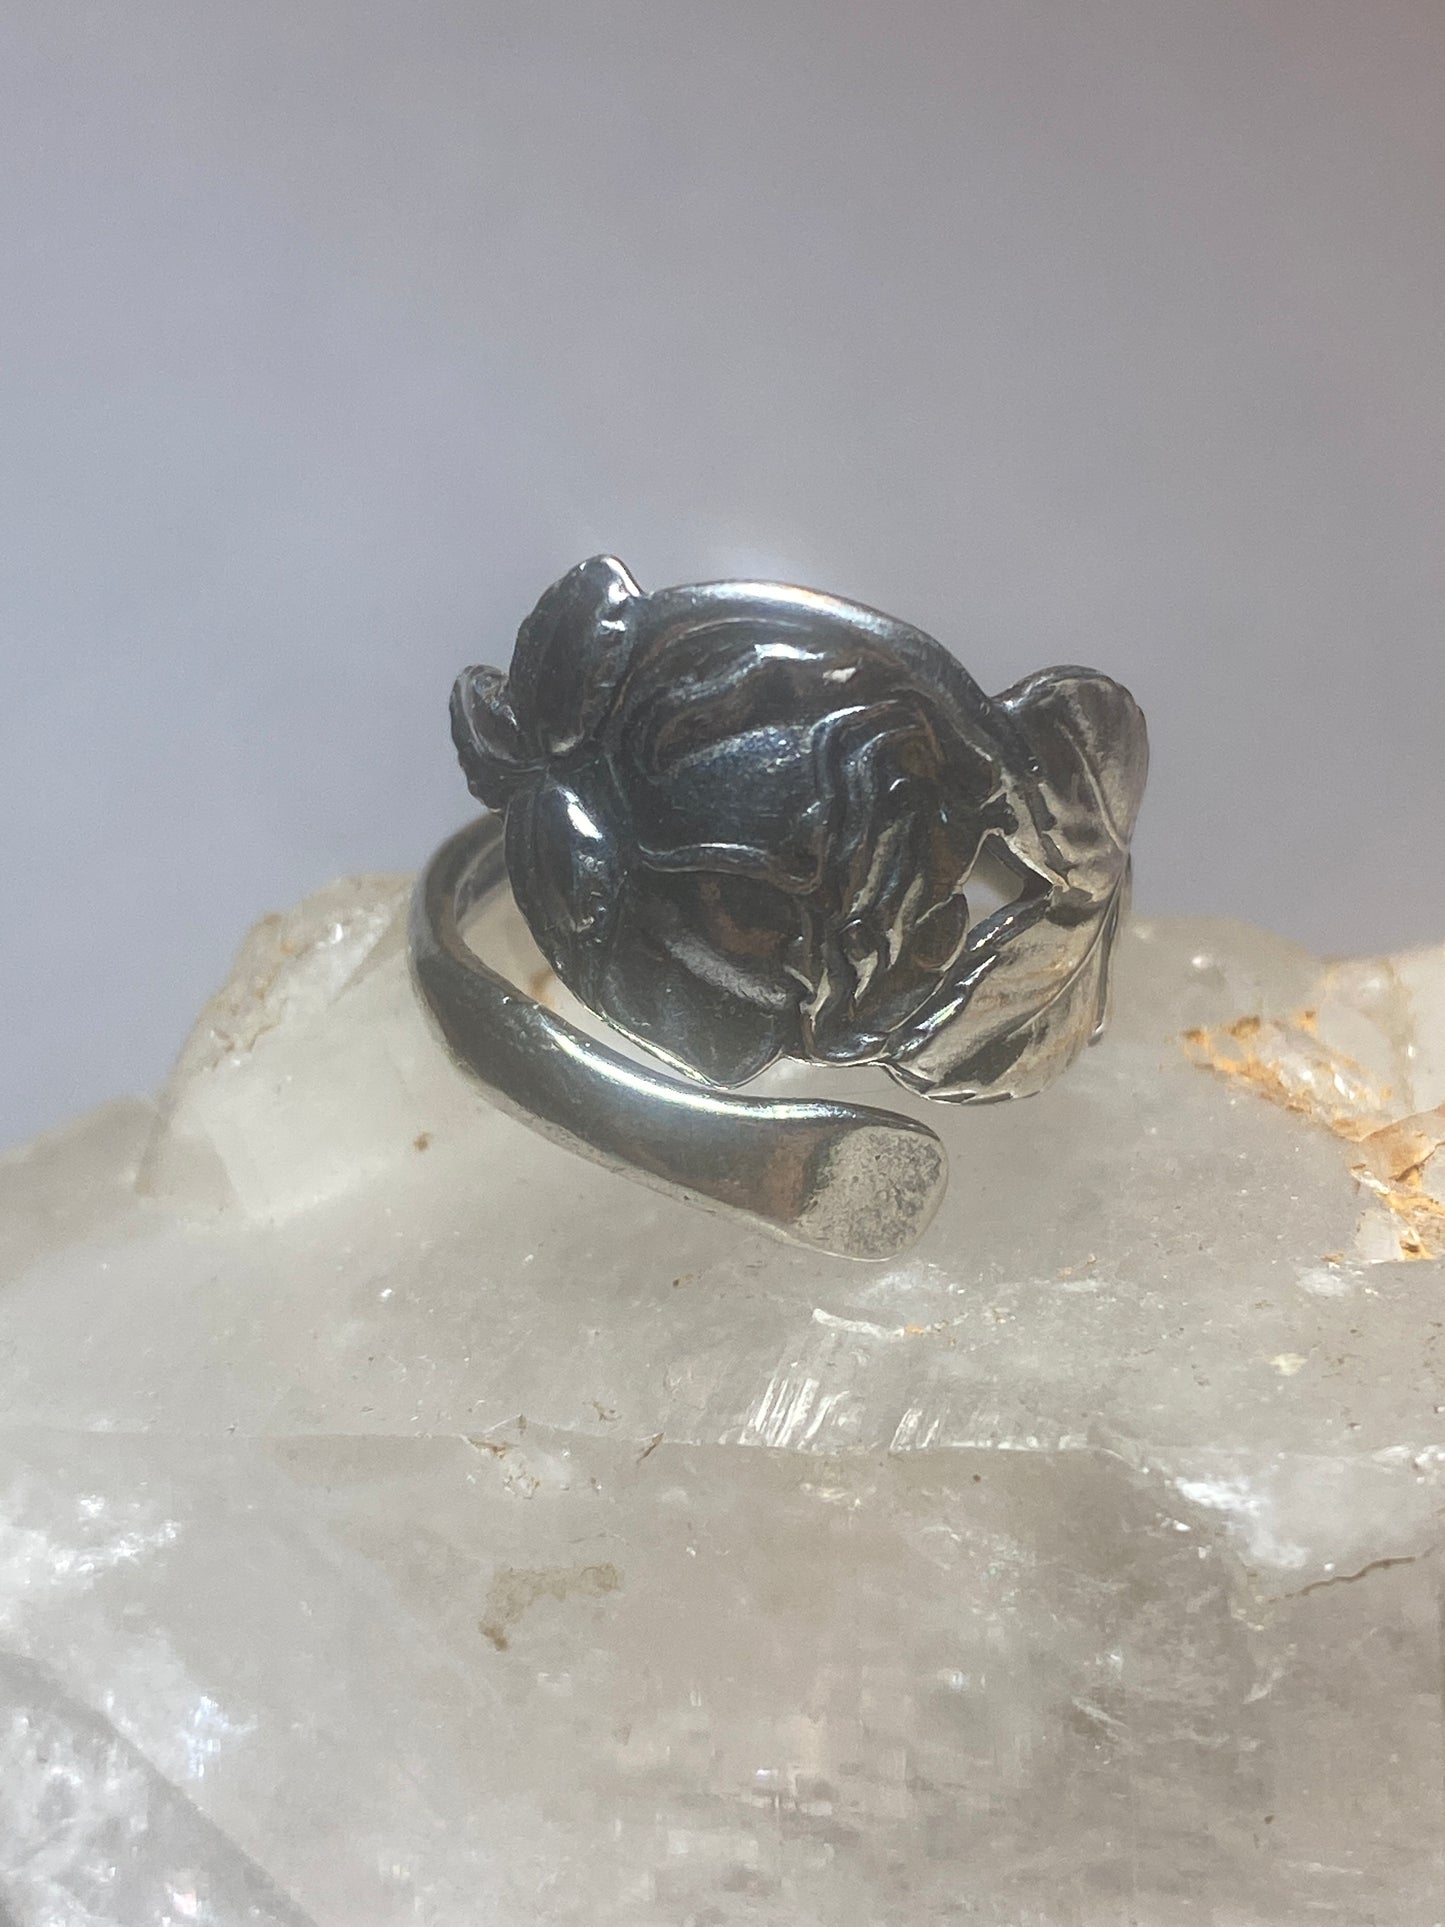 Rose spoon ring flower band sterling silver women